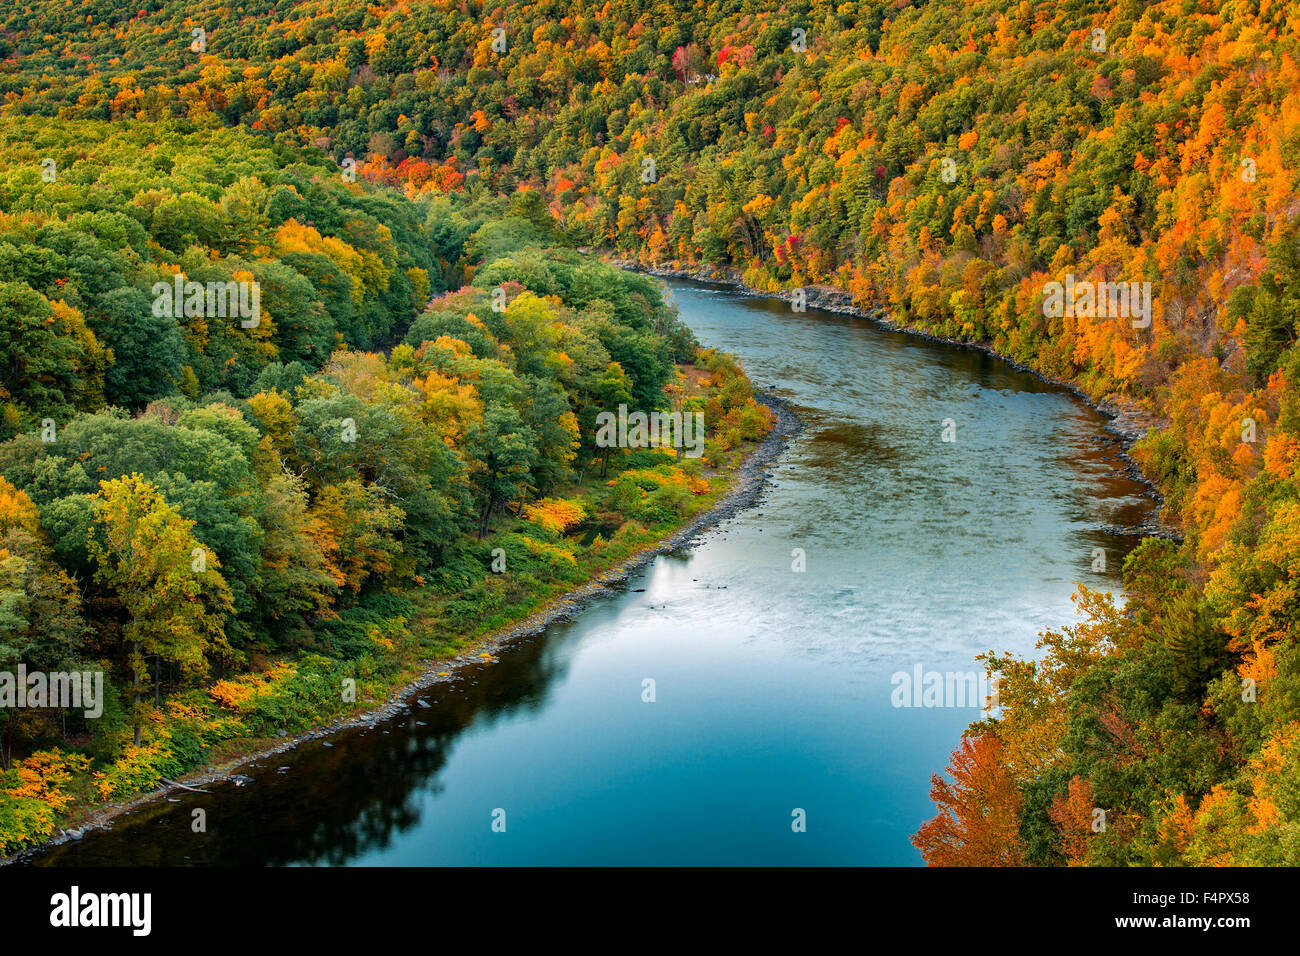 Delaware river bends through a colorful autumn forest, near Port Jervis, New York Stock Photo